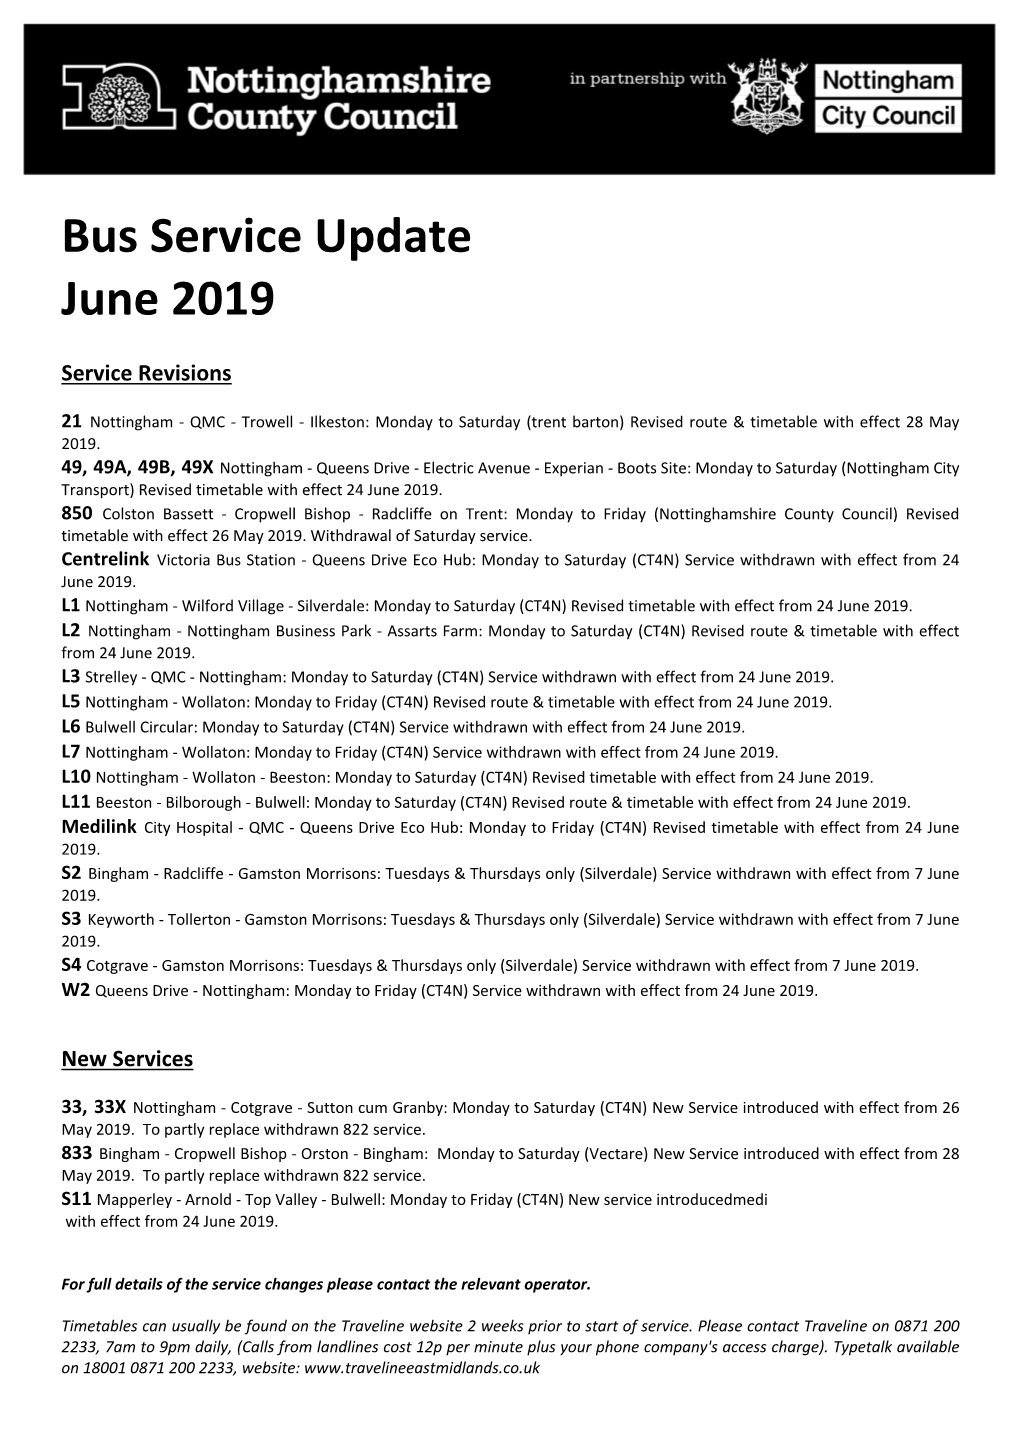 June 2019 Timetable Changes